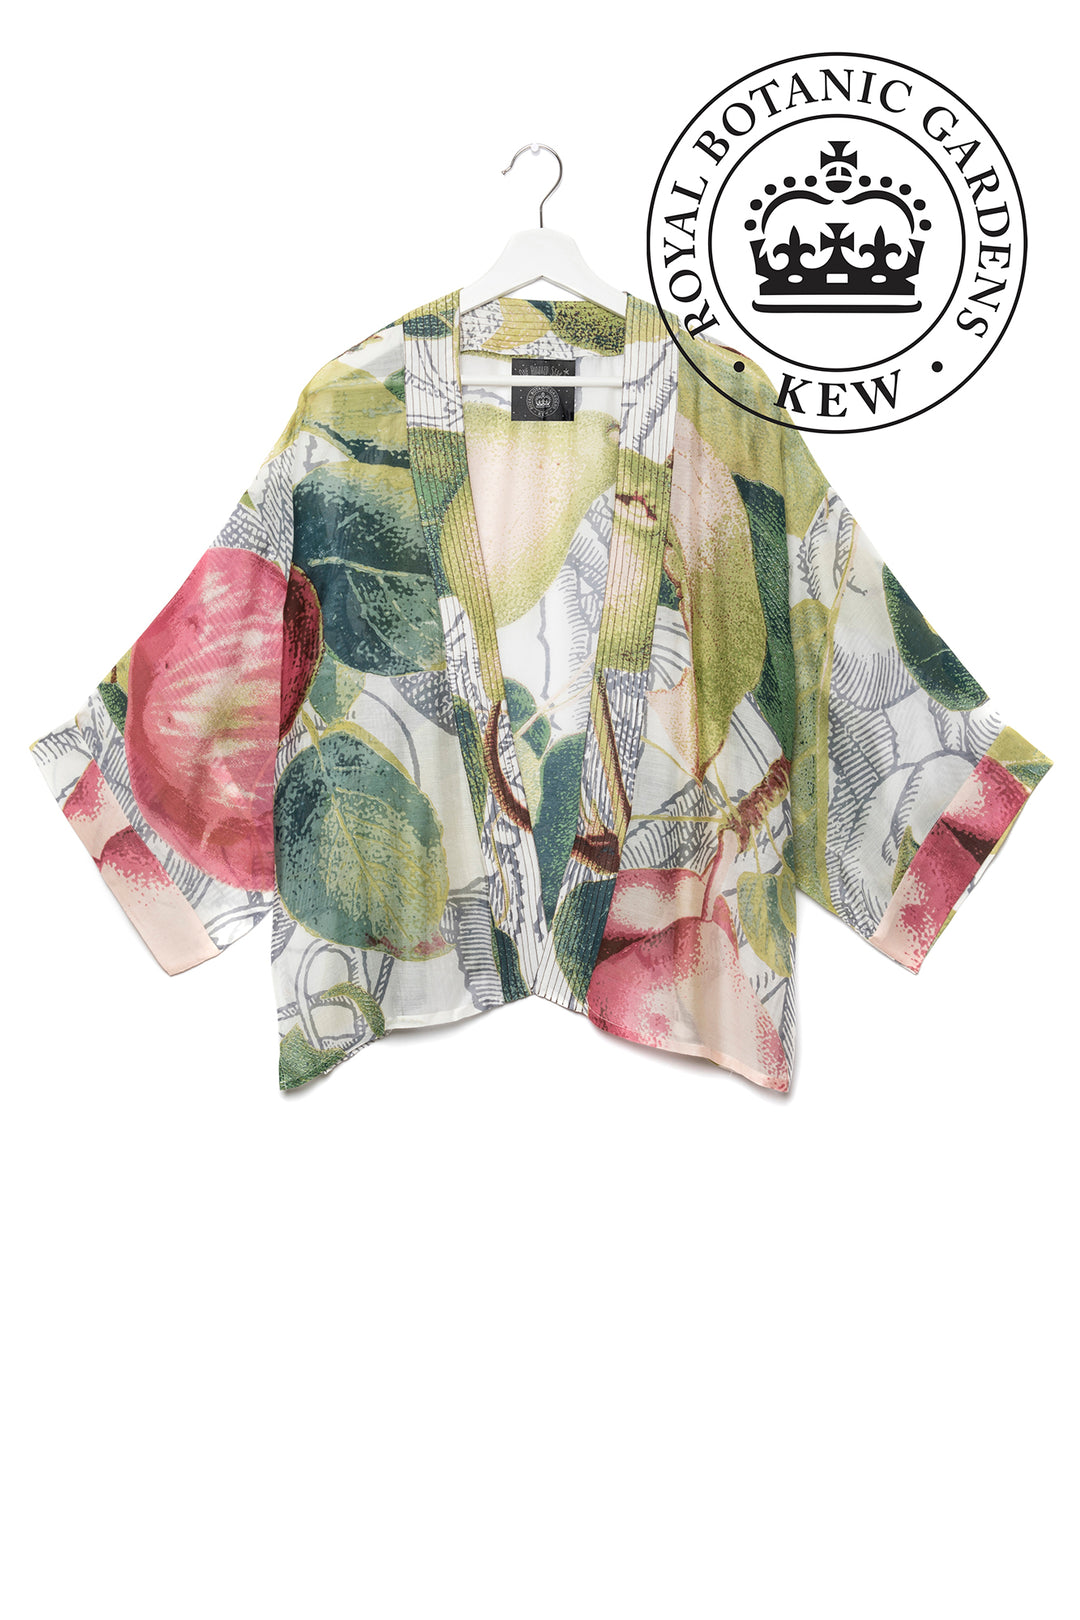 One Hundred Stars Apples and Pears White Kimono- Our bestselling kimono jackets have loose ¾ length sleeves, an open front and a lightly embroidered lapel. Pair with a matching camisole and your favourite jeans in summer or layer over a polo neck during the cooler months.